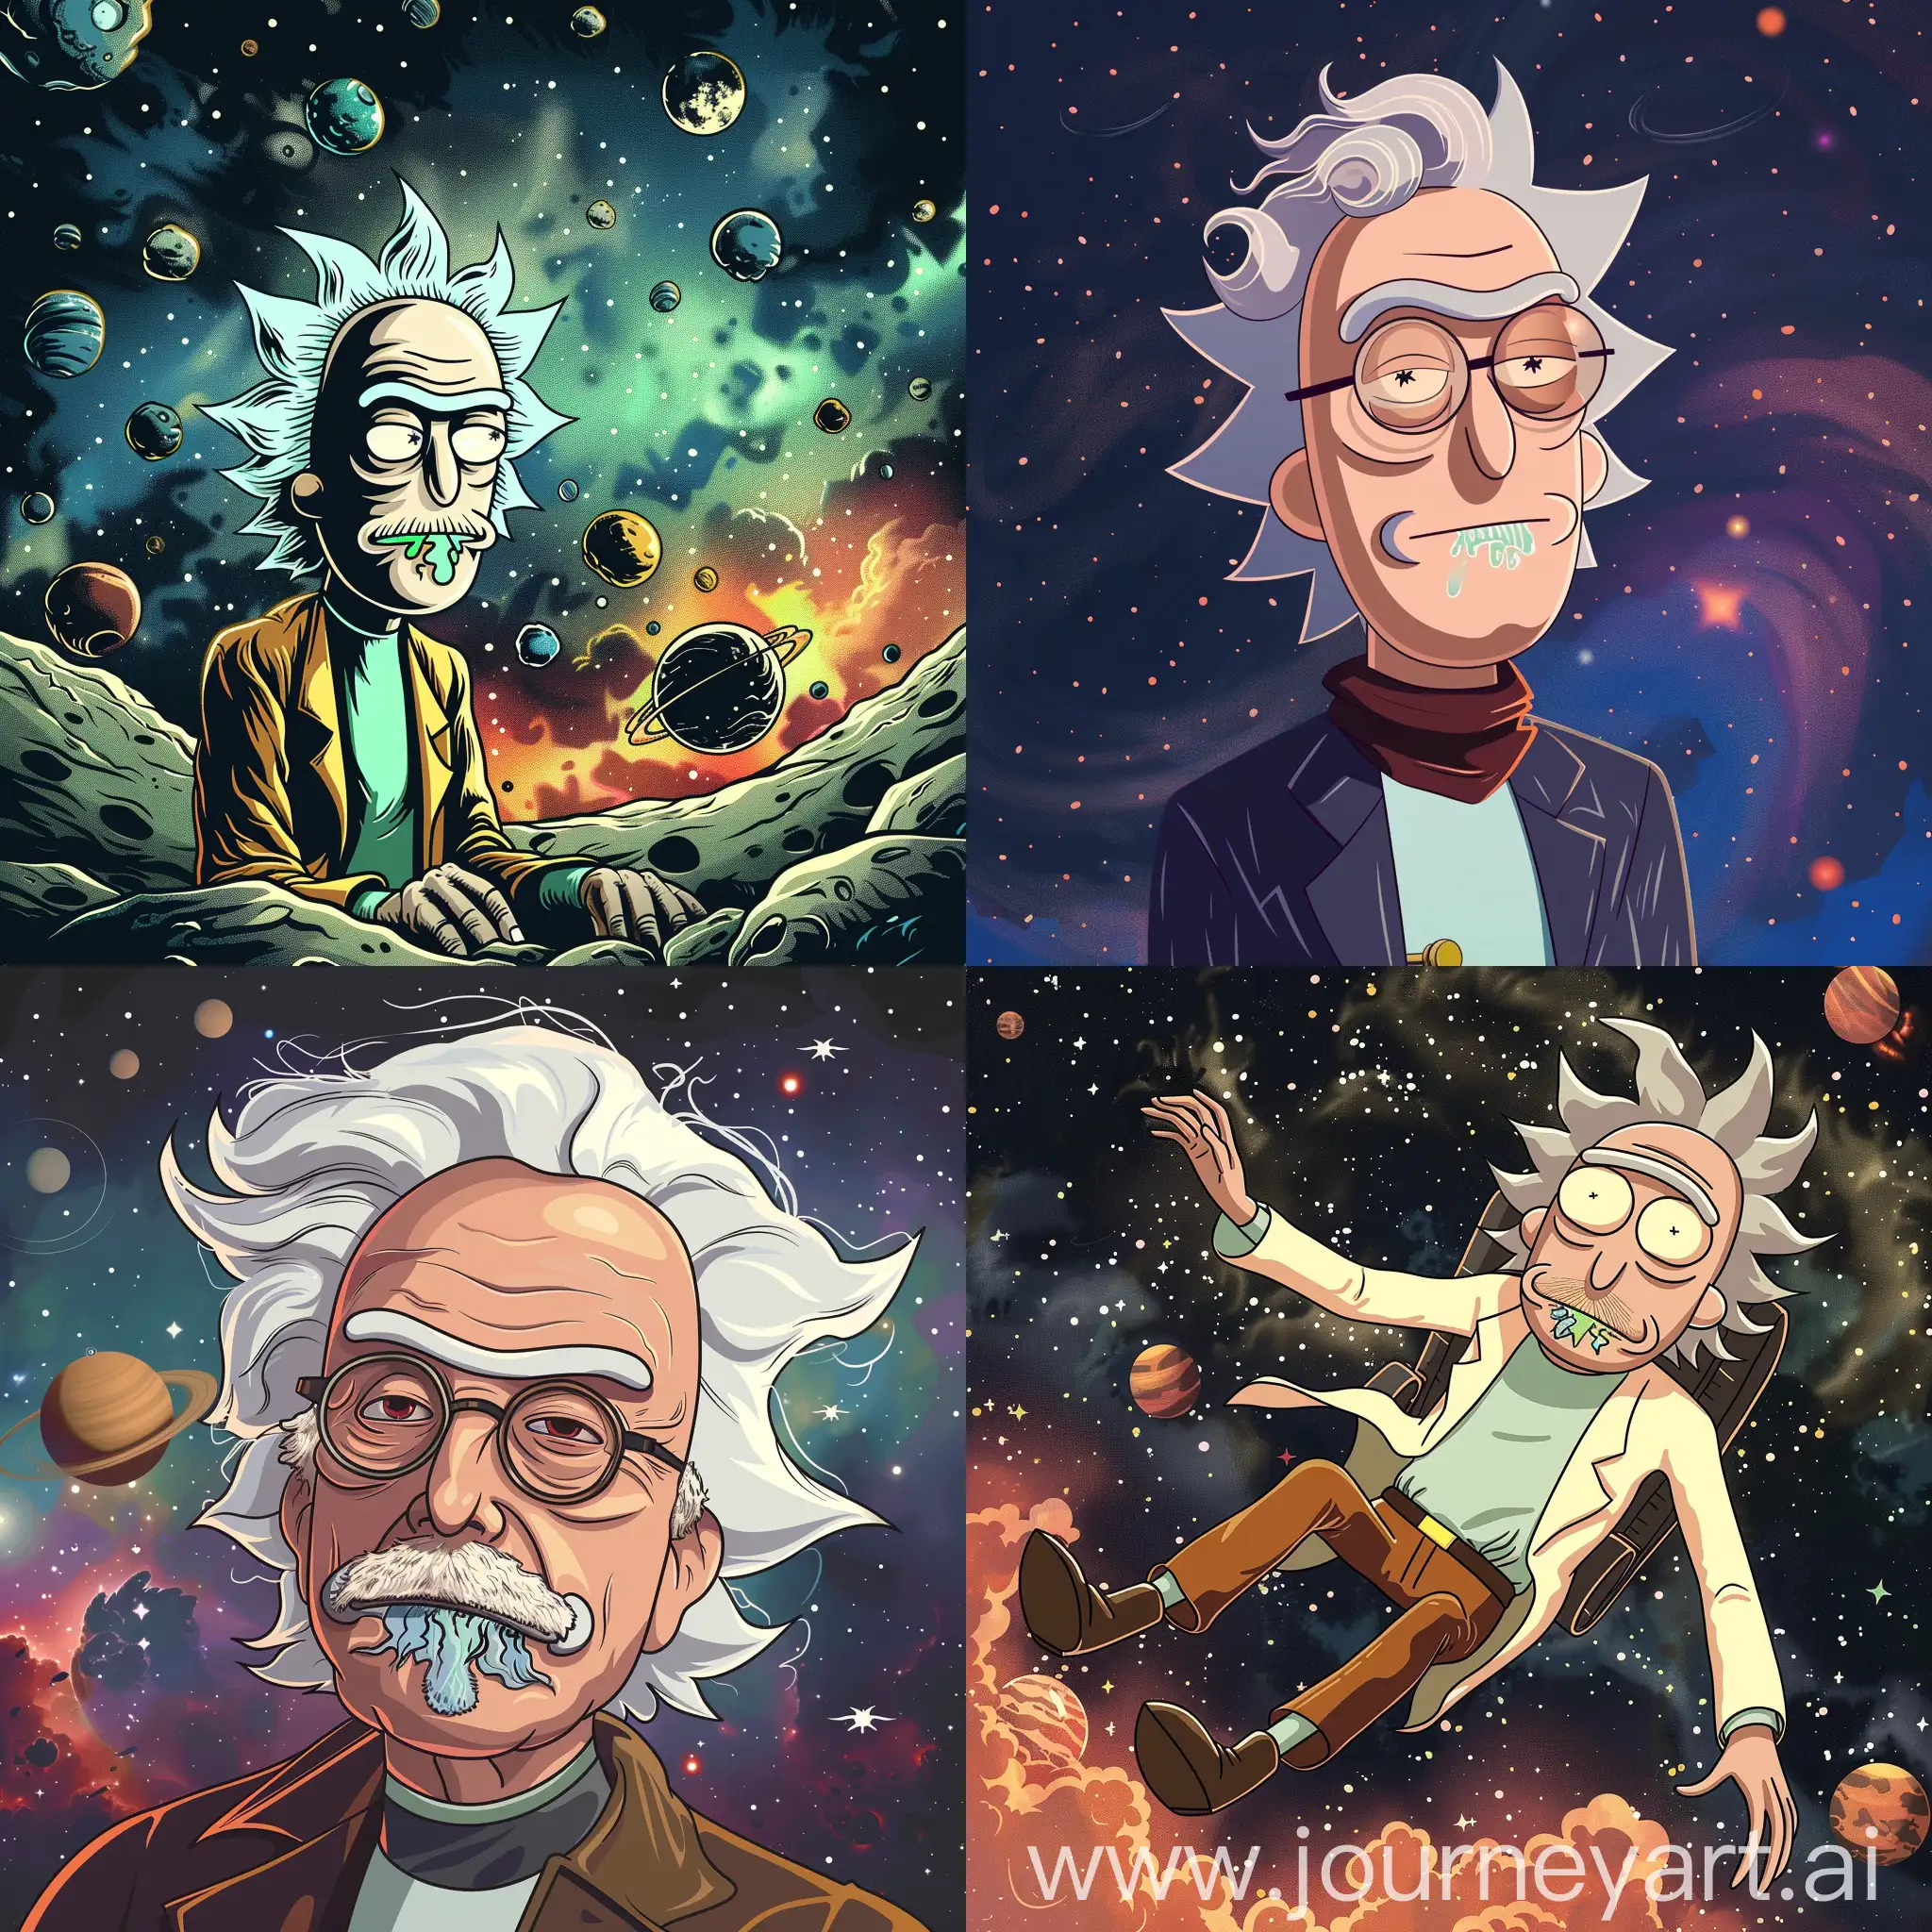 Albert Einstein in space Rick and Morty cartoon style